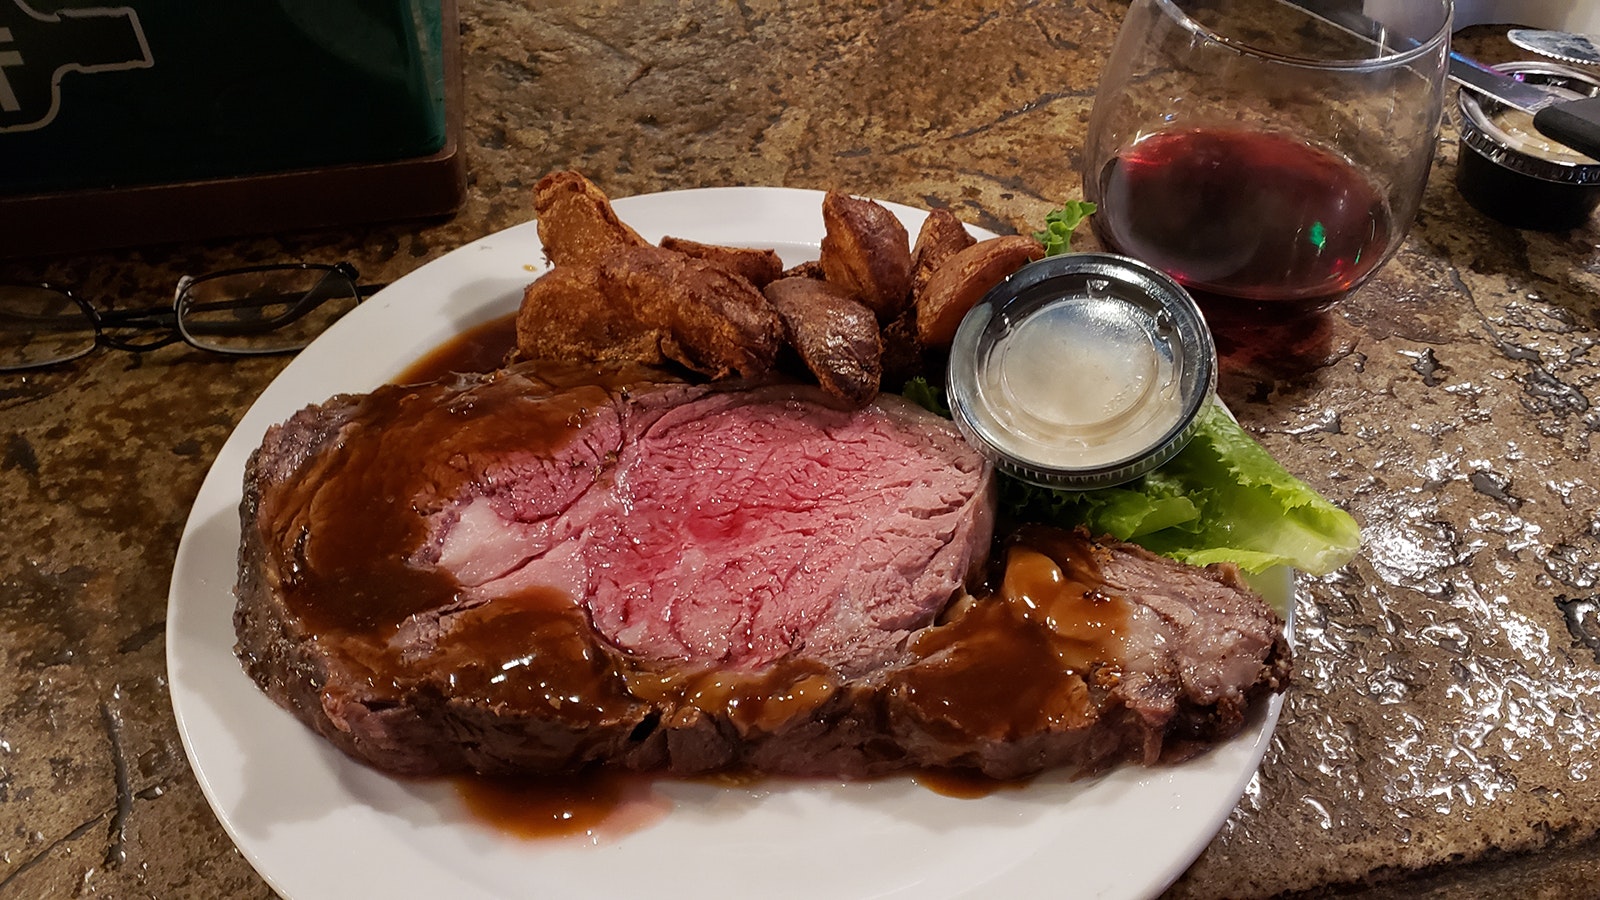 When there's time, Crabby Chef Michael Dean Coronato prefers making things like this prime rib for dinner.